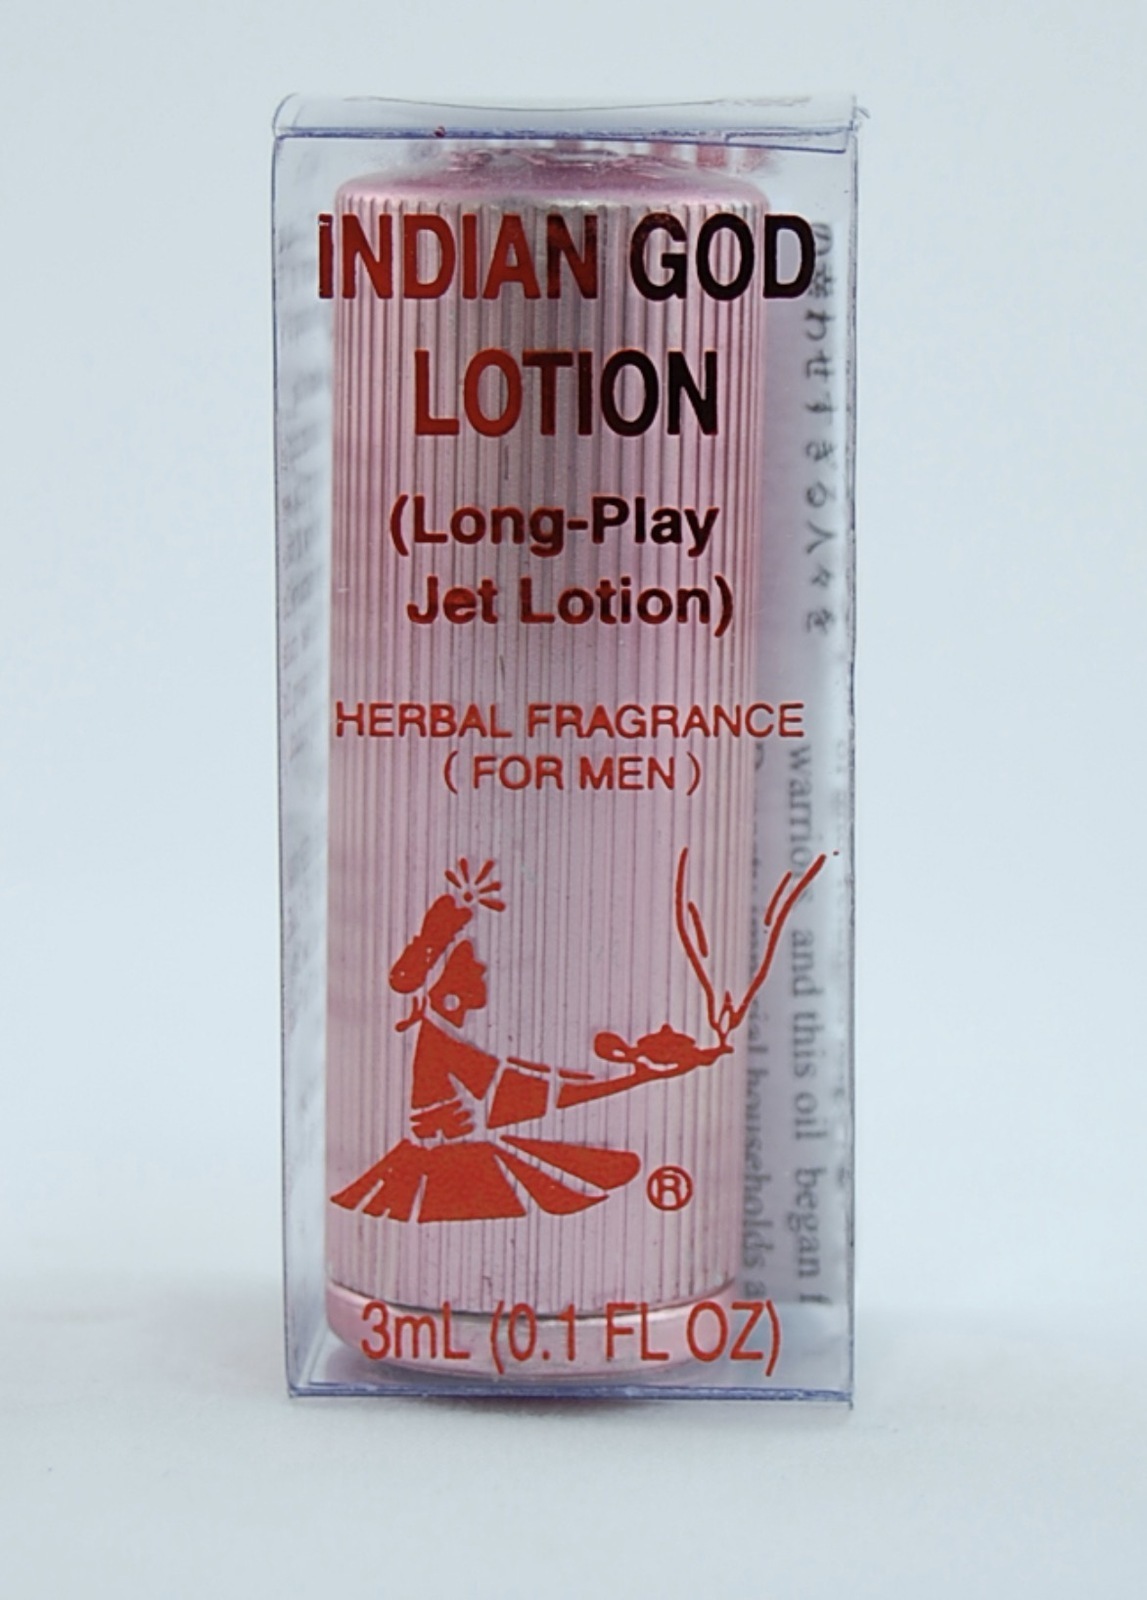 Indian God Lotion Spray Long Play SEX Delay - Herbal Fragrance for MEN